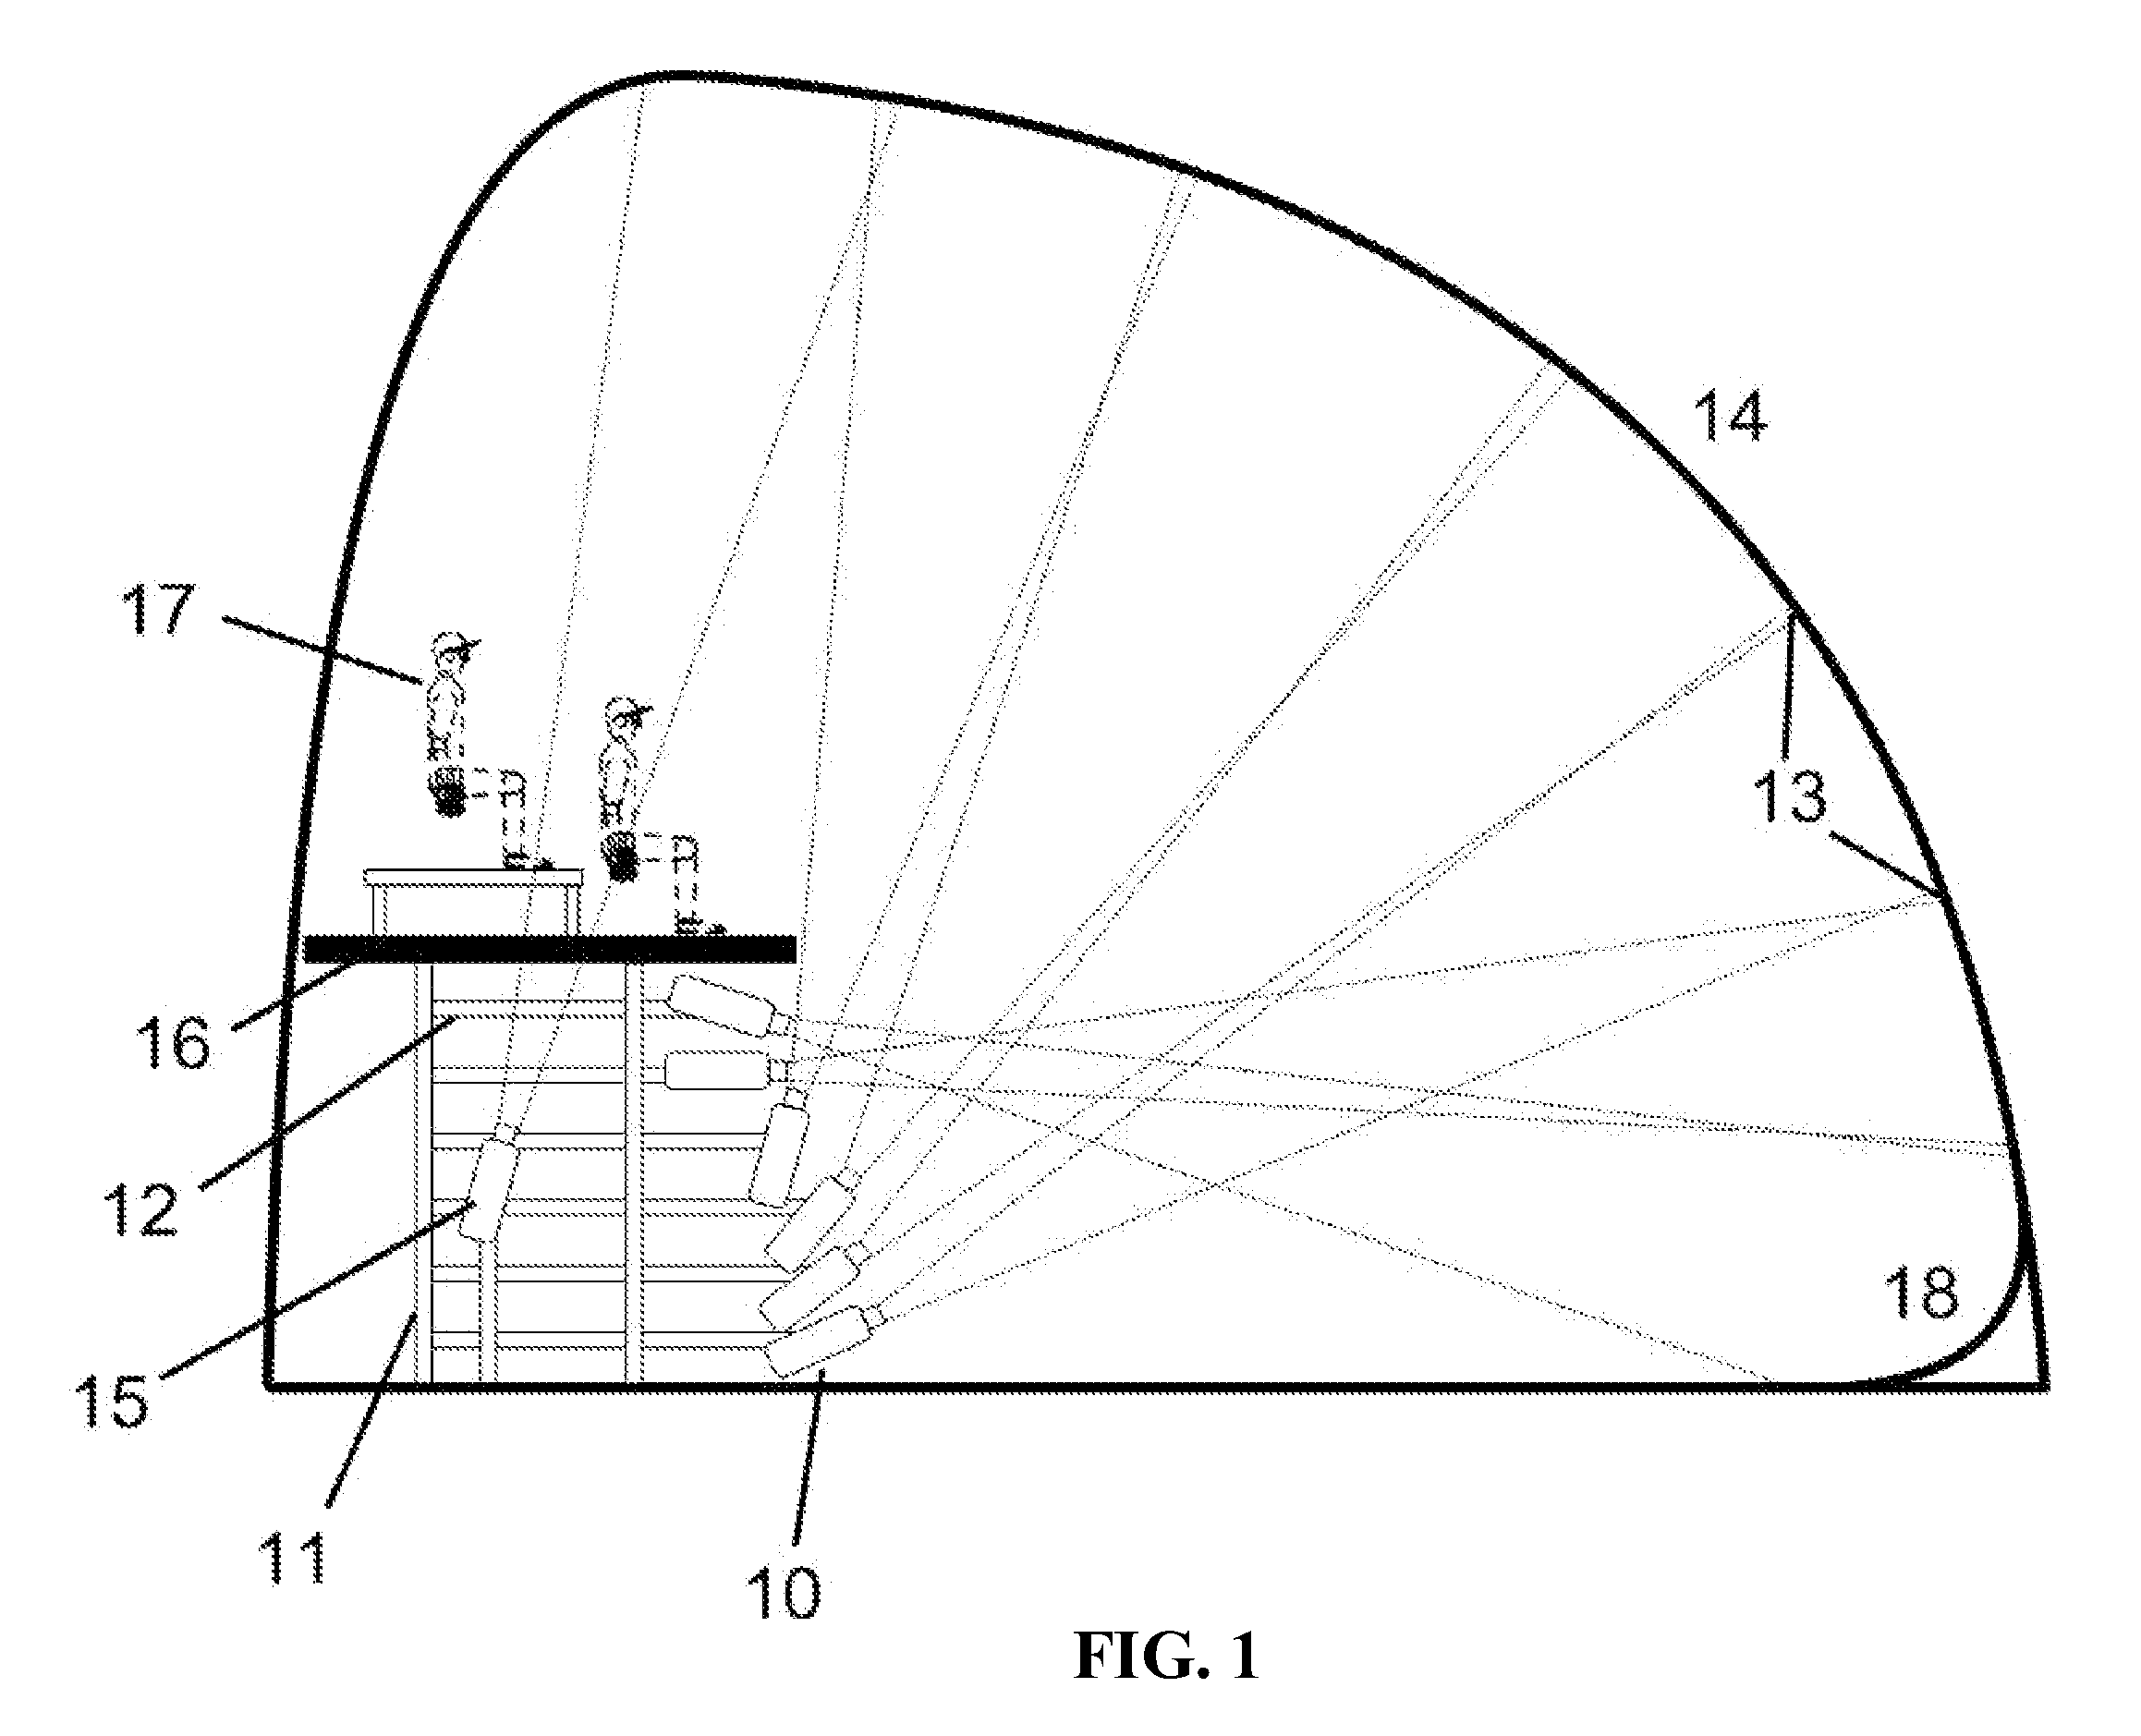 System for providing an enhanced immersive display environment